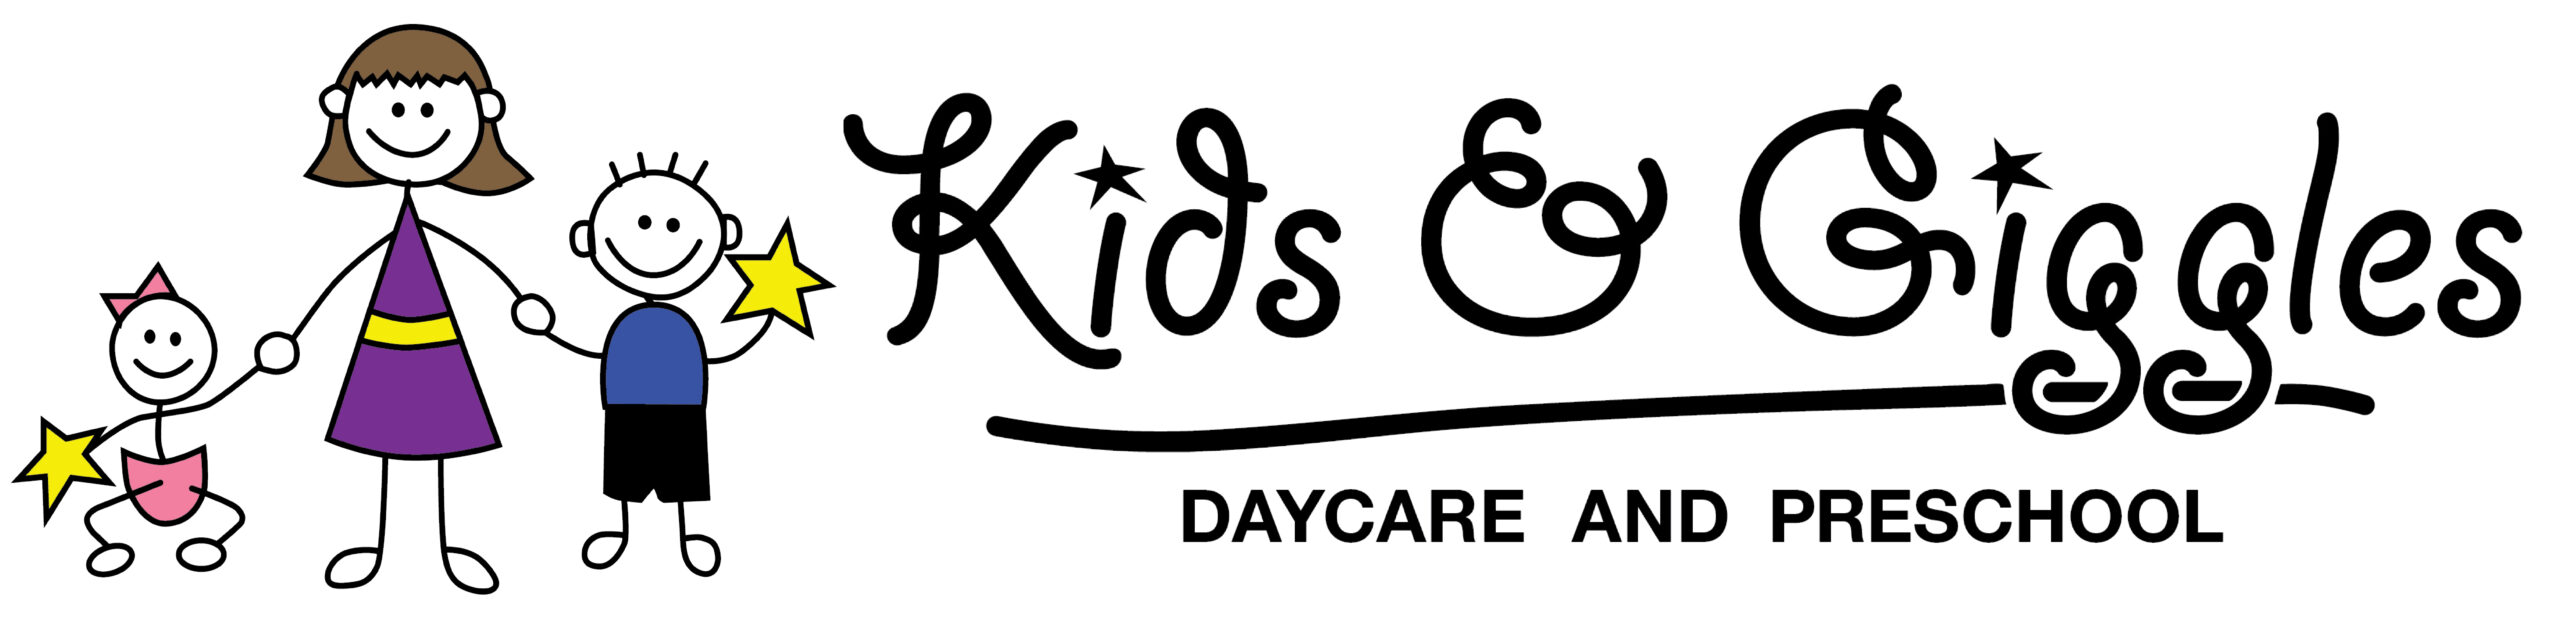 Kids and Giggles Childcare